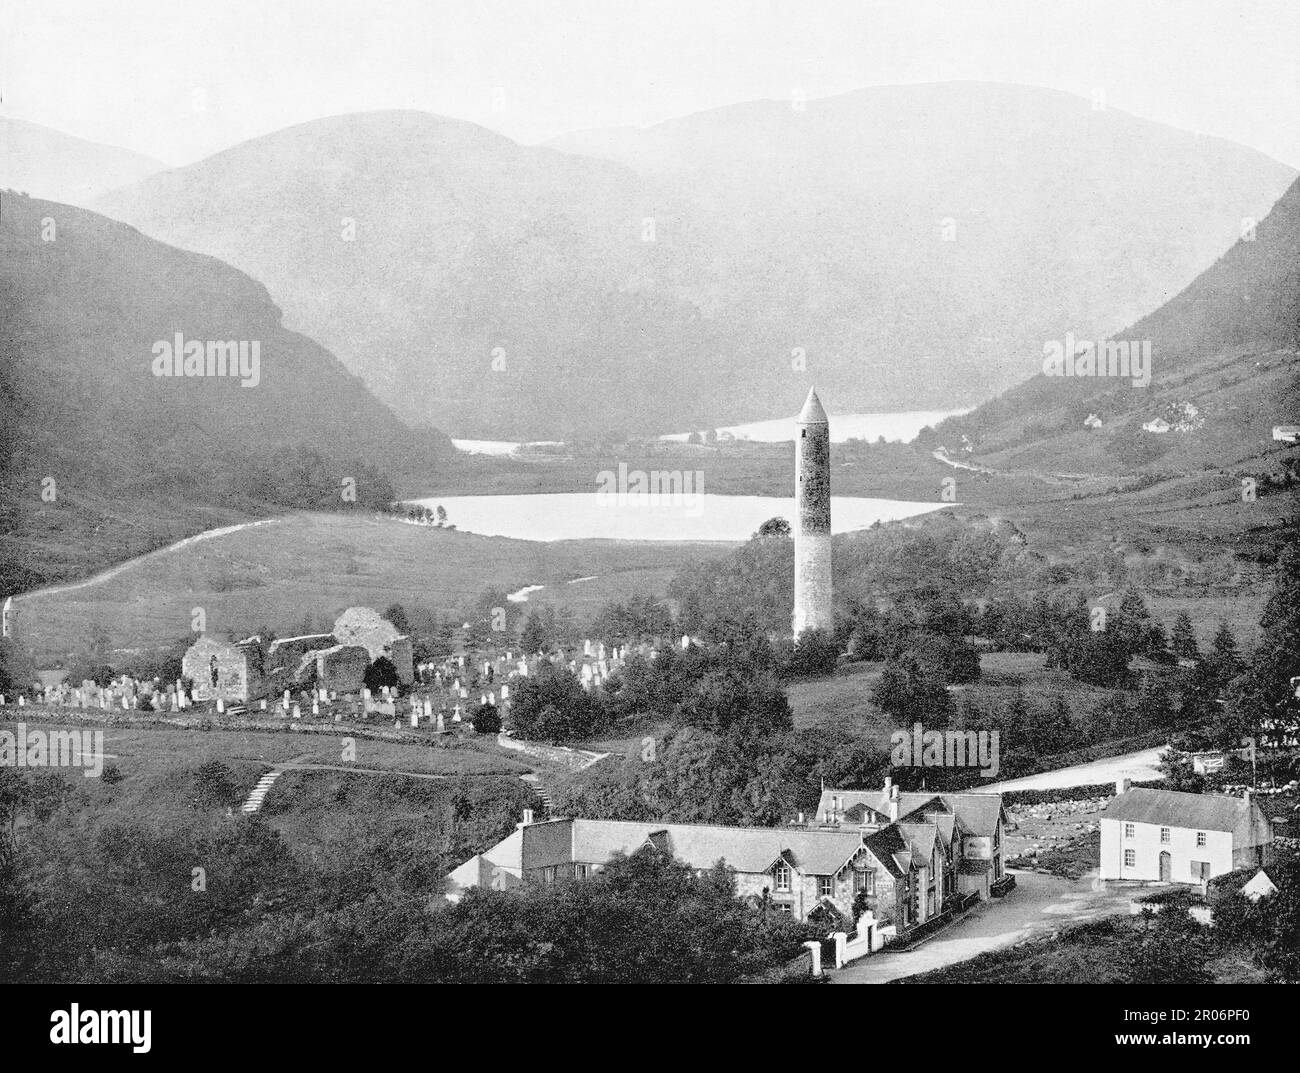 A late 19th century view of Glendalough, renowned for its Early Medieval monastic settlement founded in the 6th century by St Kevin in County Wicklow, Ireland.  Kevin, a descendant of one of the ruling families in Leinster, went to Glendalough with a small group of monks to found a monastery. The surviving buildings probably date from between the 10th and 12th centuries when the monastery included workshops, areas for manuscript writing and copying, guest houses, an infirmary, farm buildings and dwellings for both the monks and a large lay population. Stock Photo